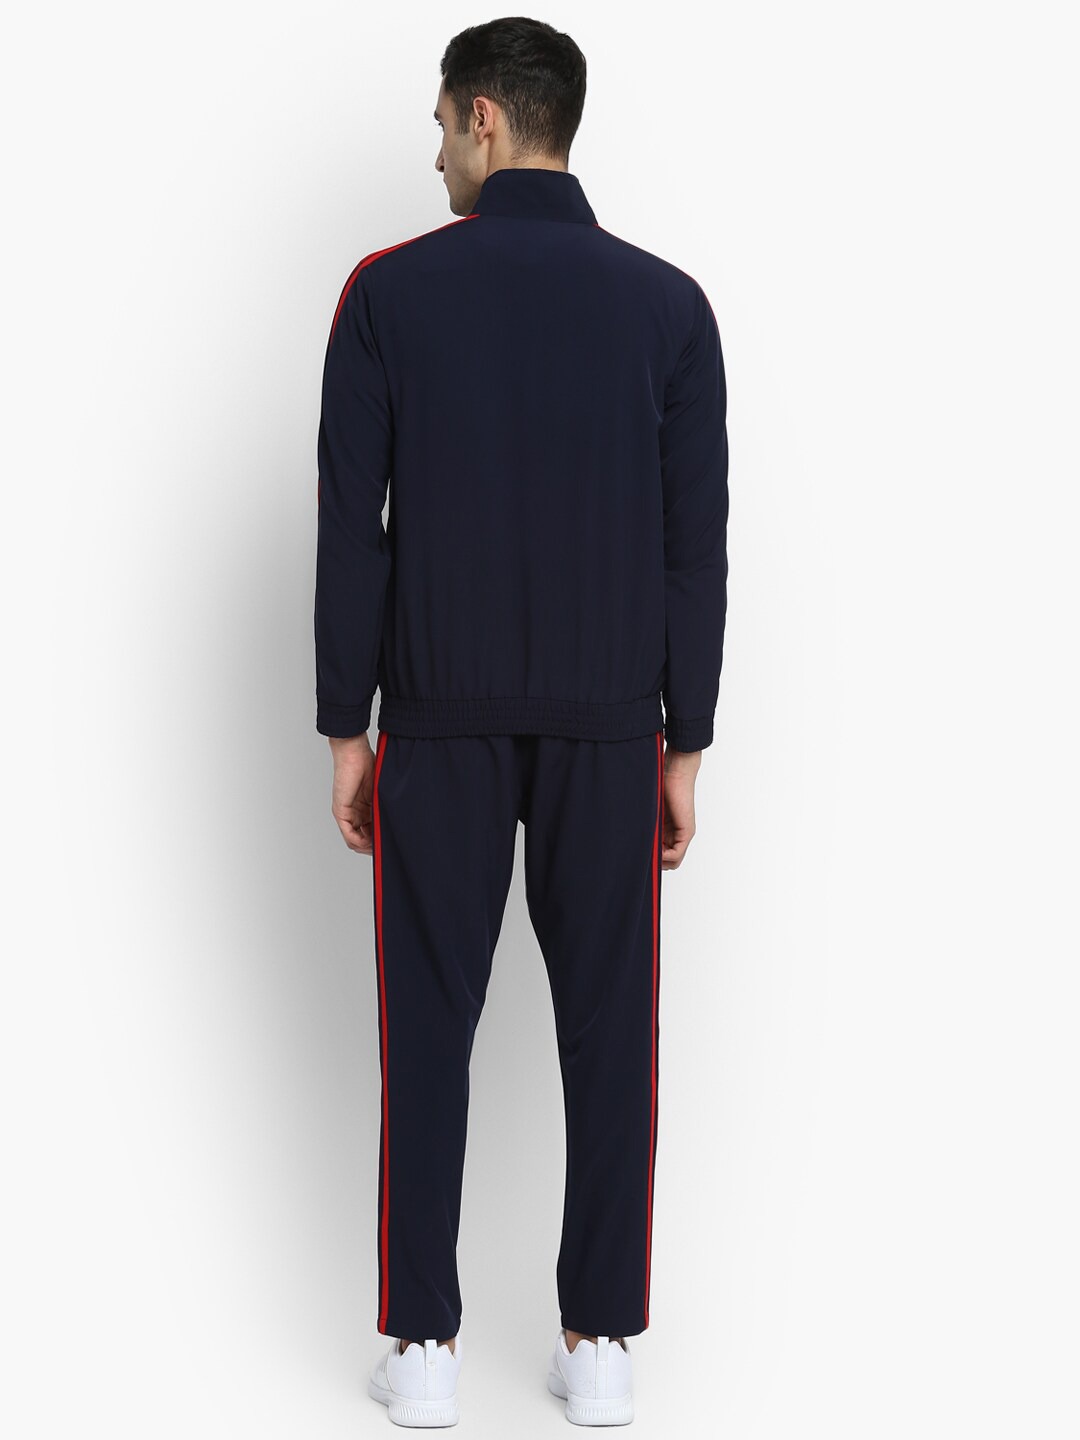 Clothing Tracksuits | OFF LIMITS Men Navy Blue & Red Solid Tracksuit - SC86251